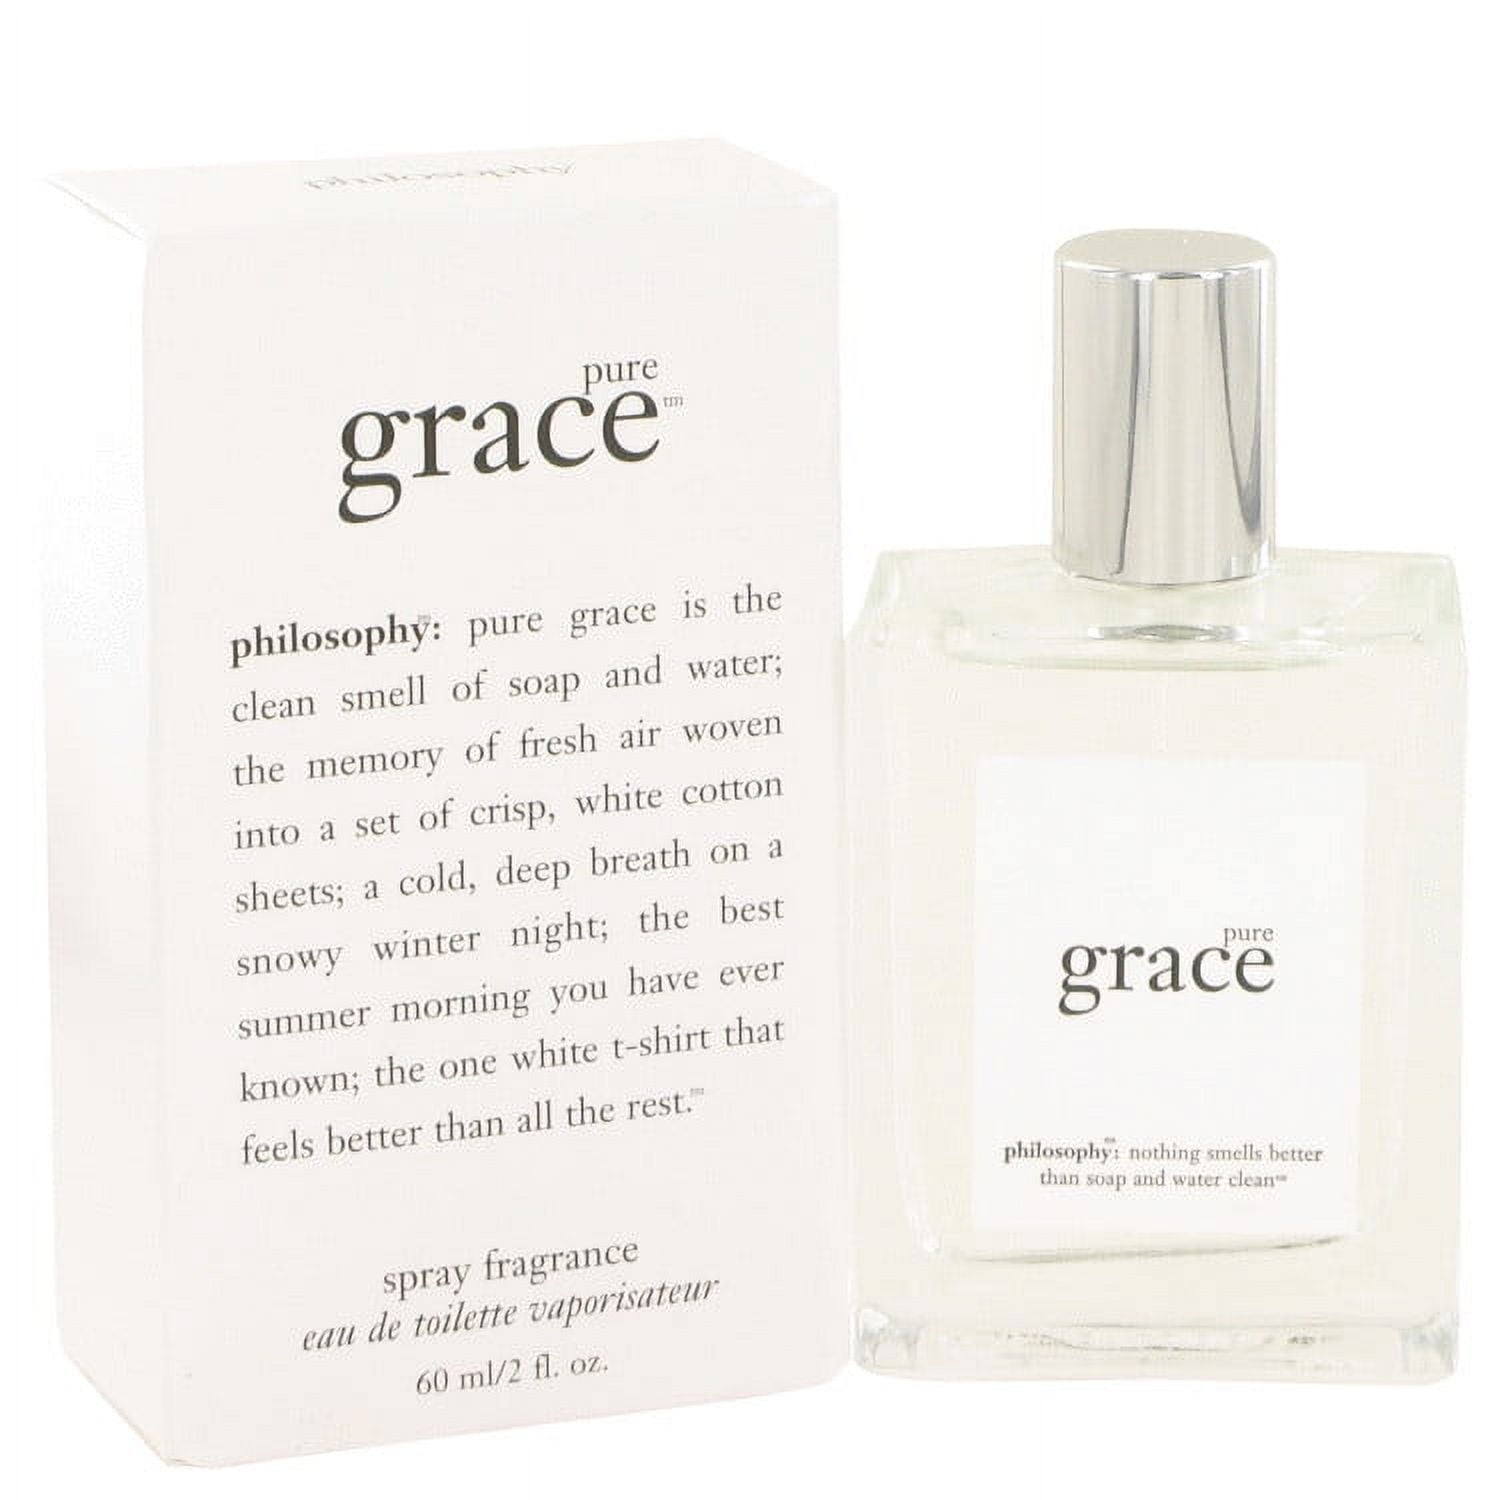 Pure Grace Perfume By Philosophy for Women